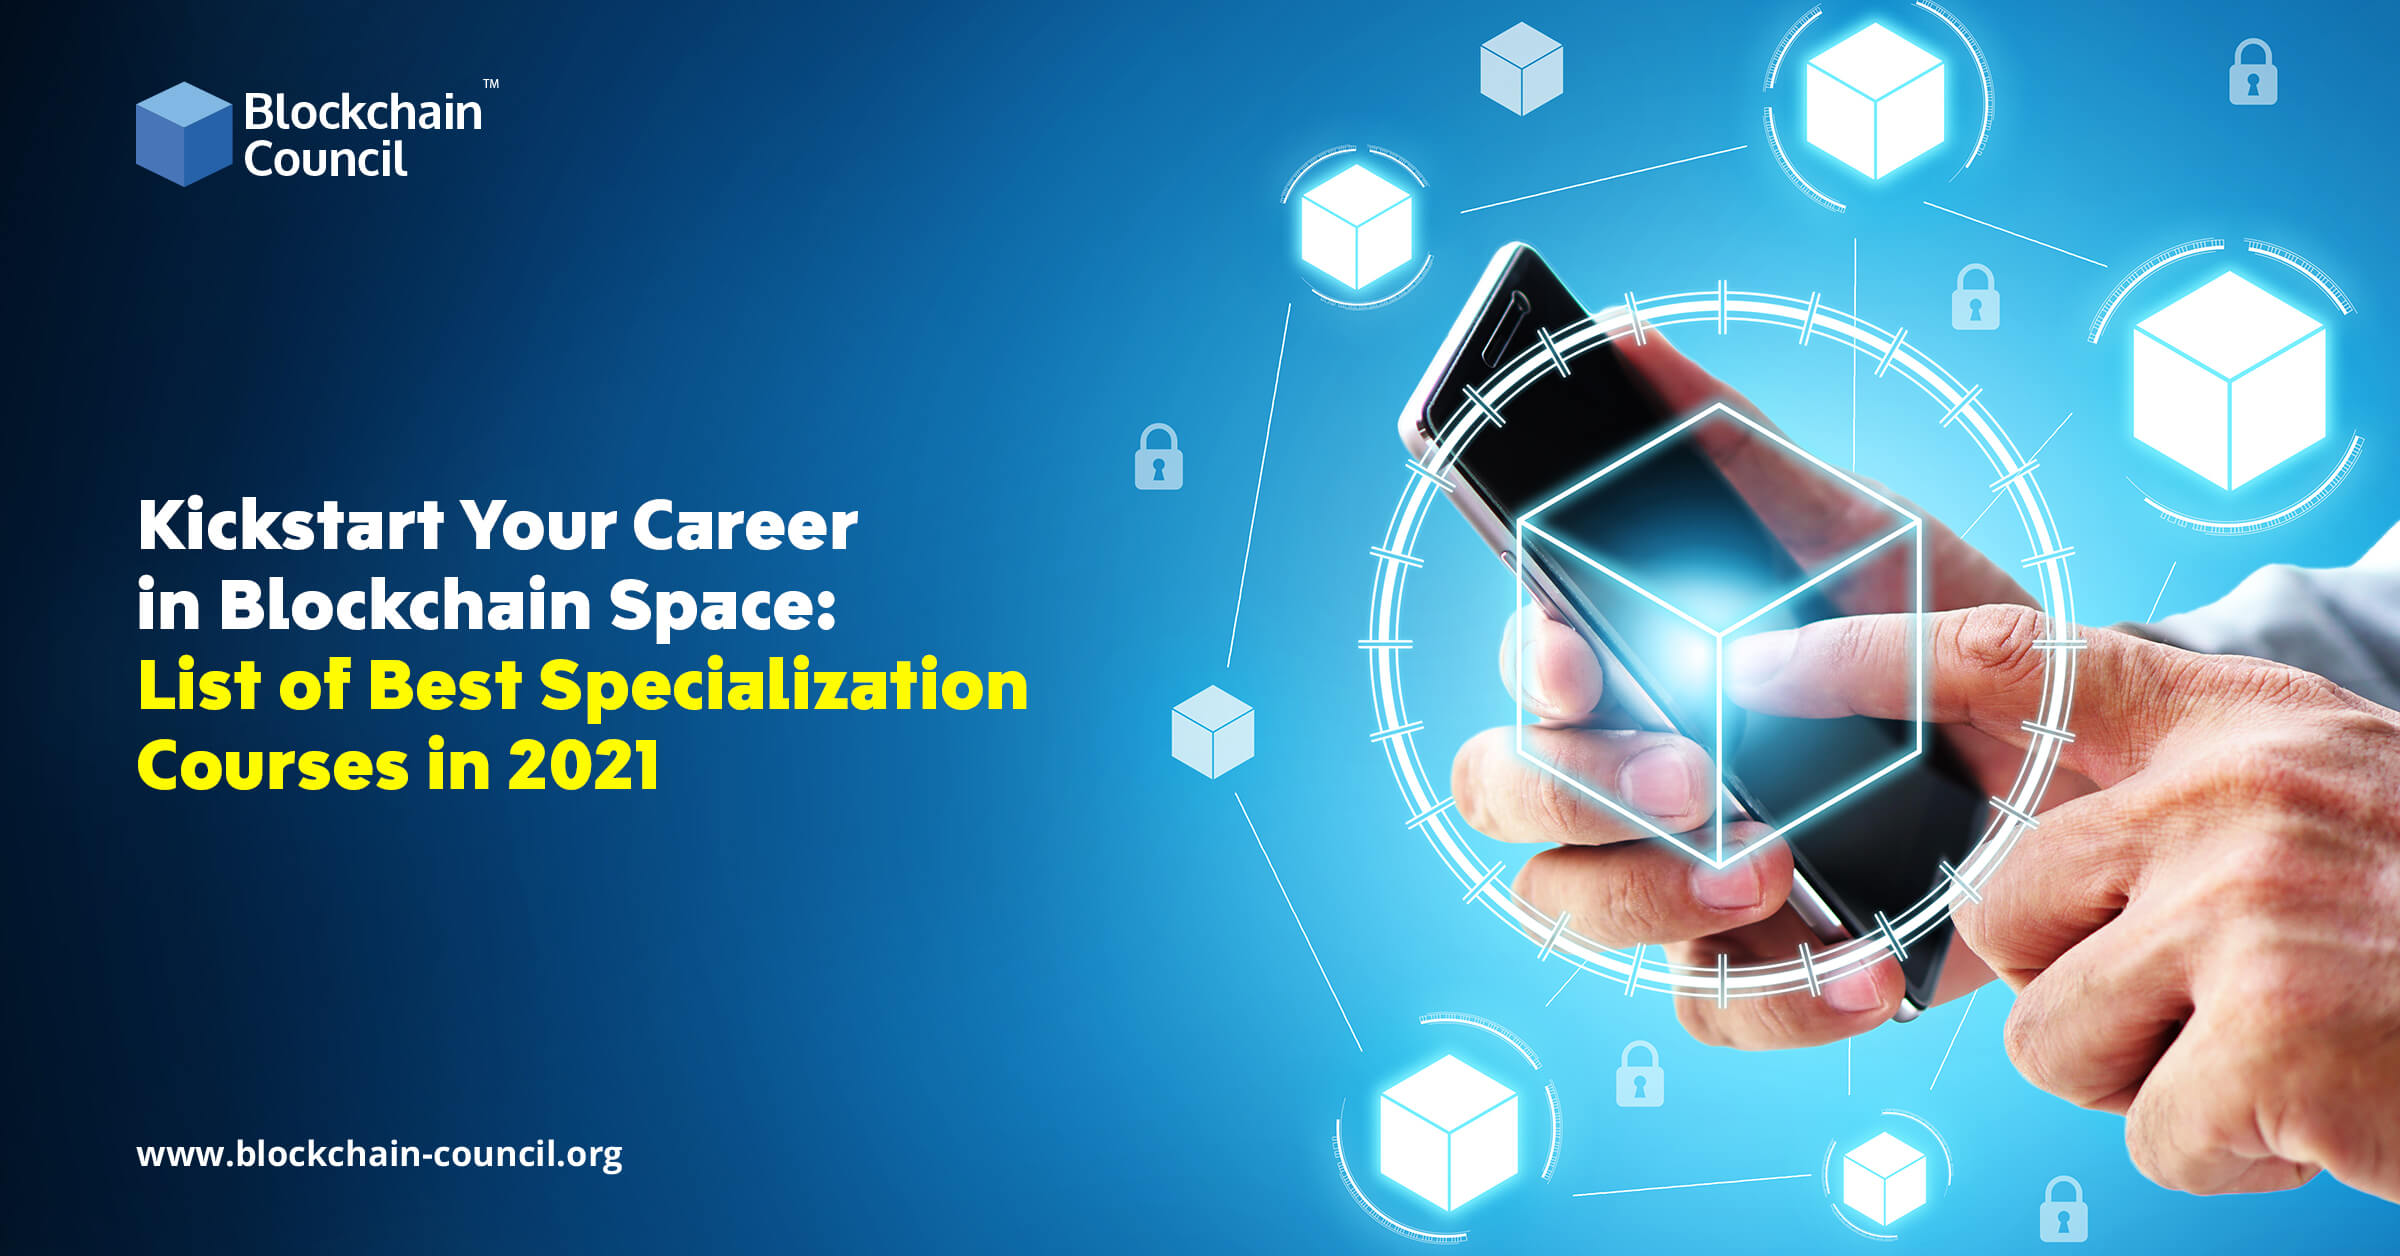 Kickstart Your Career in Blockchain Space: List of Best Specialization Courses in 2021